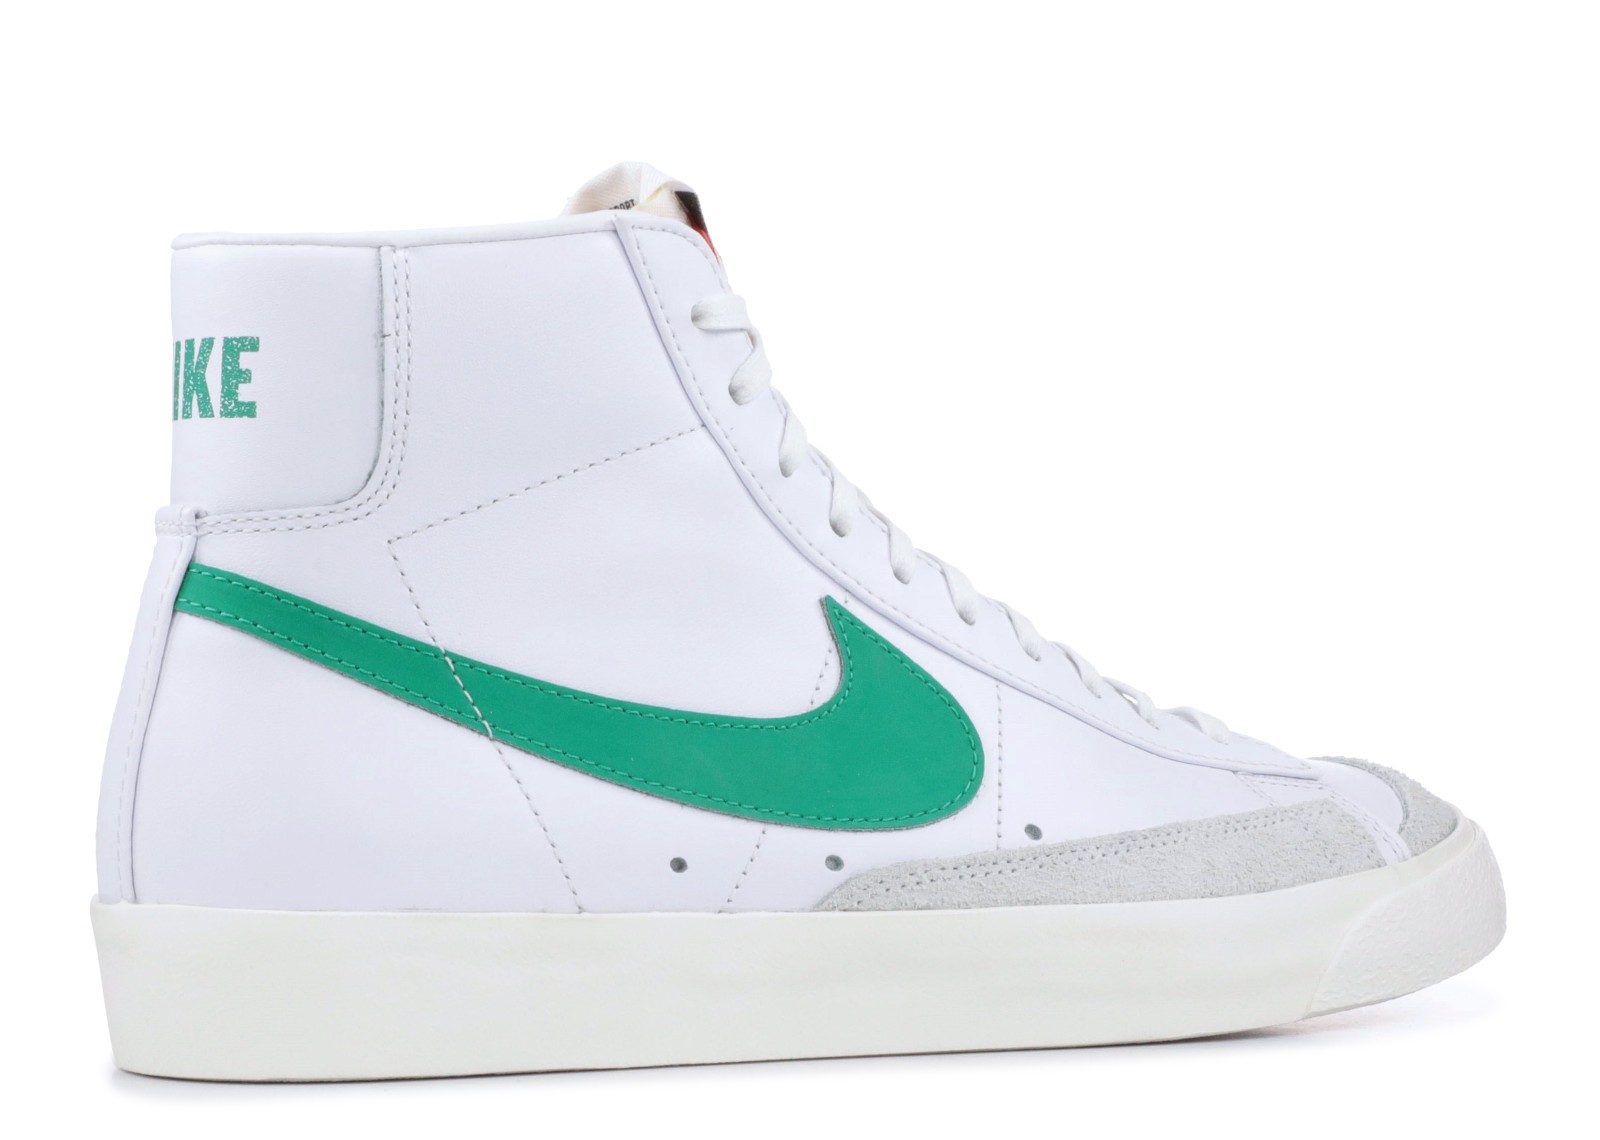 Openbaren handboeien Charmant the will remain a big thing for Nike and all its fans in 2022 77 Vintage  White Sail Lucid Green BQ6806 - GmarShops - 300 - Кроссовки зимние nike air  max 90 mid winter black термоносок зима